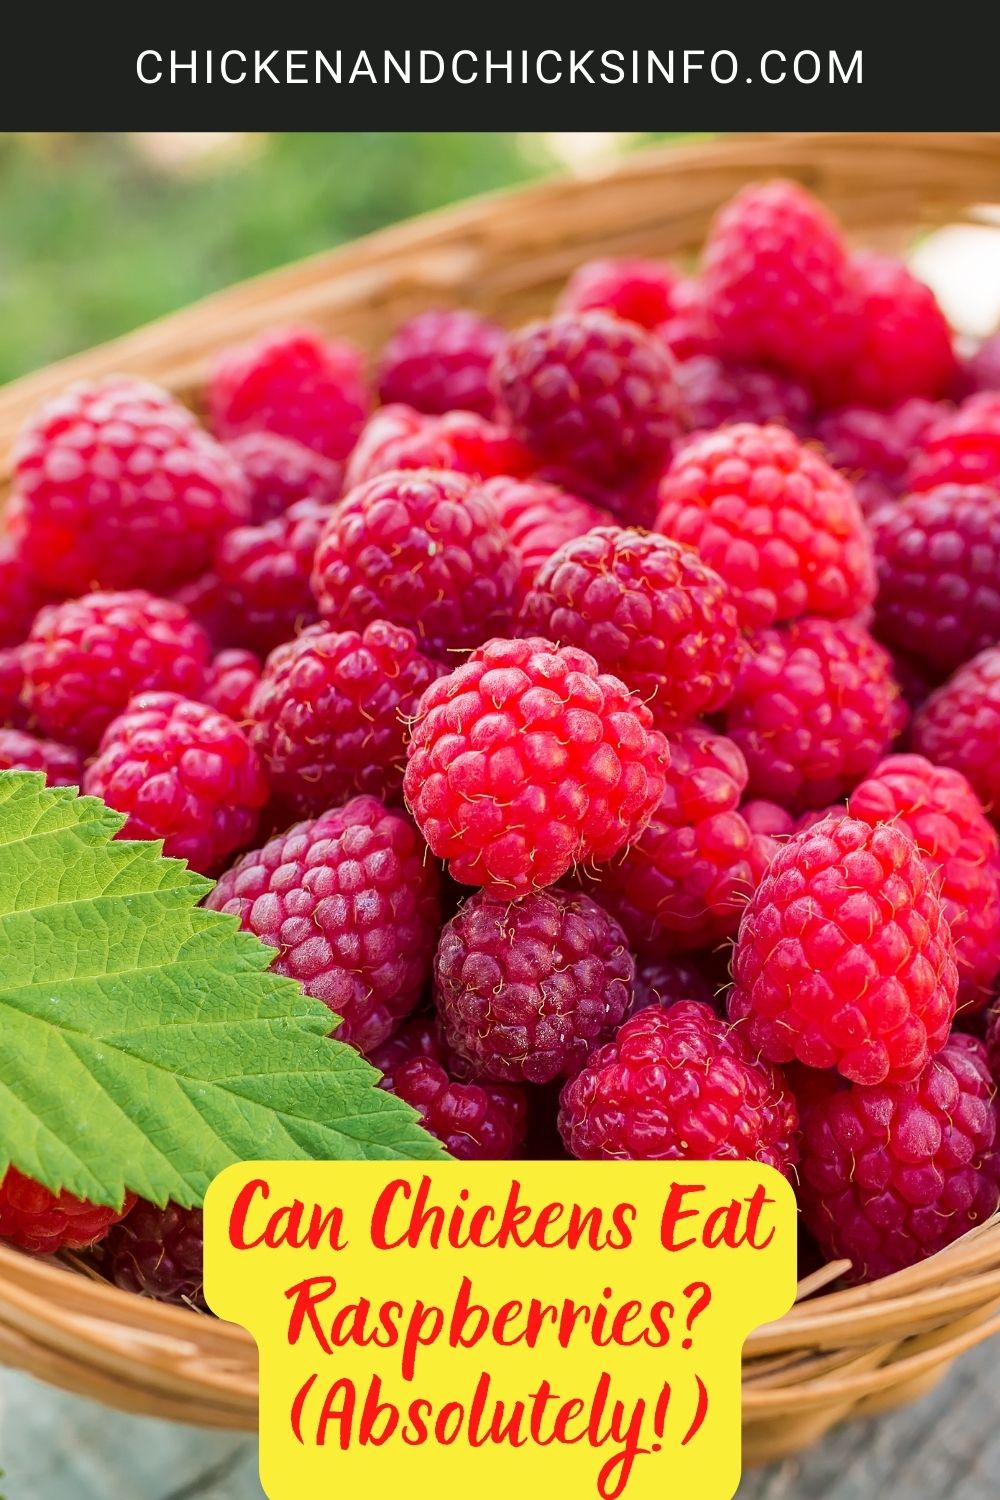 Can Chickens Eat Raspberries? (Absolutely!) poster.
